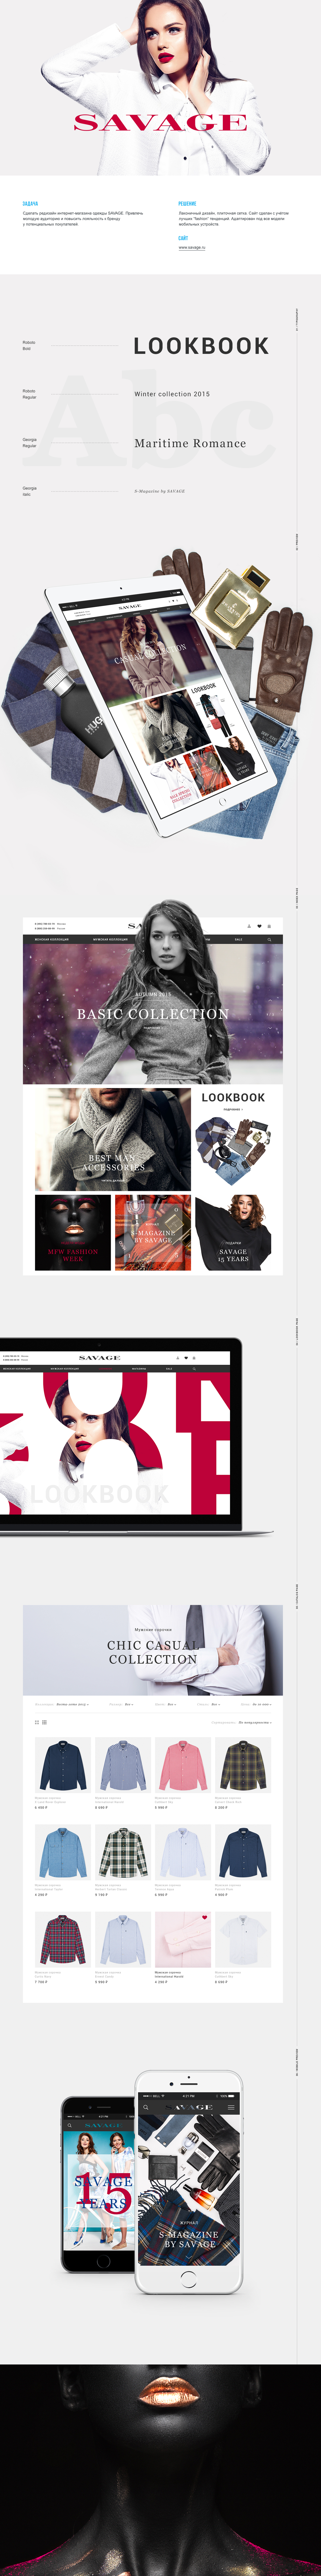 savage redesign Web site clothes